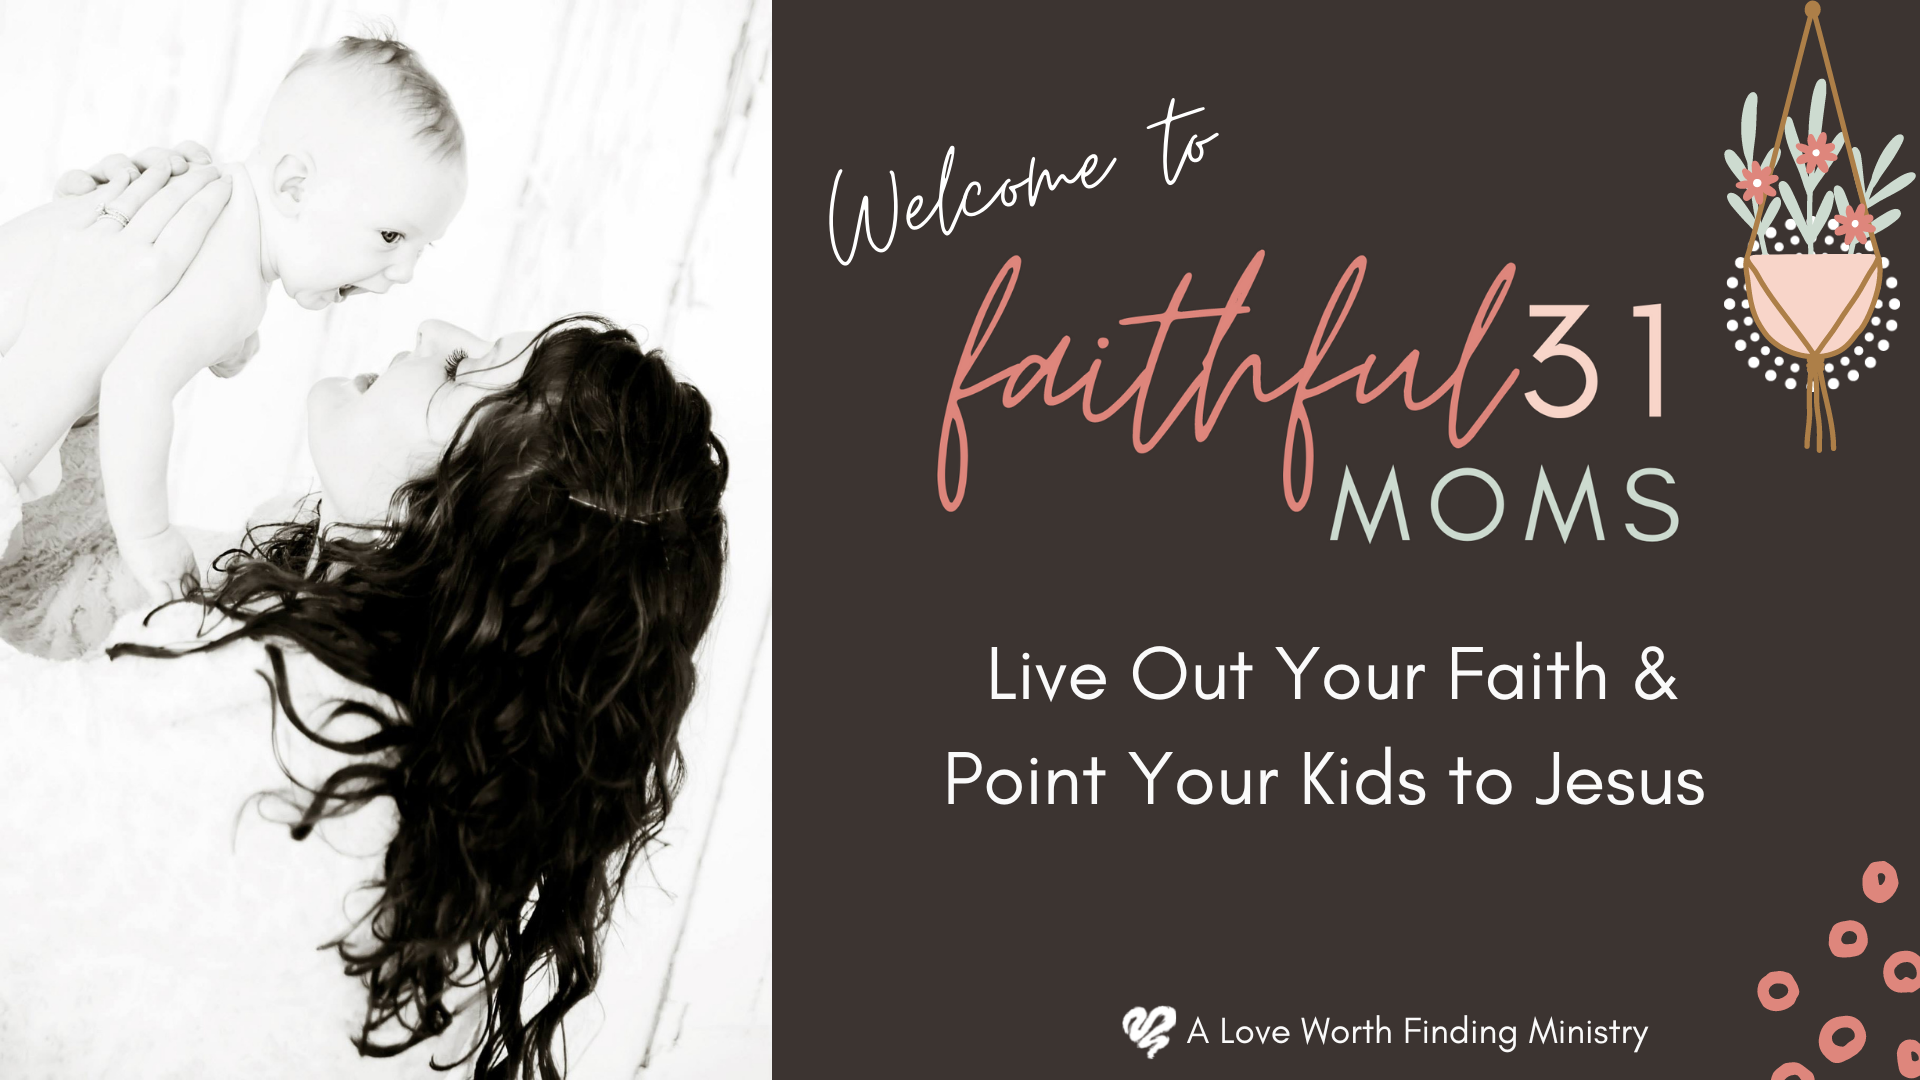 Living out your faith & Pointing your kids to Jesus